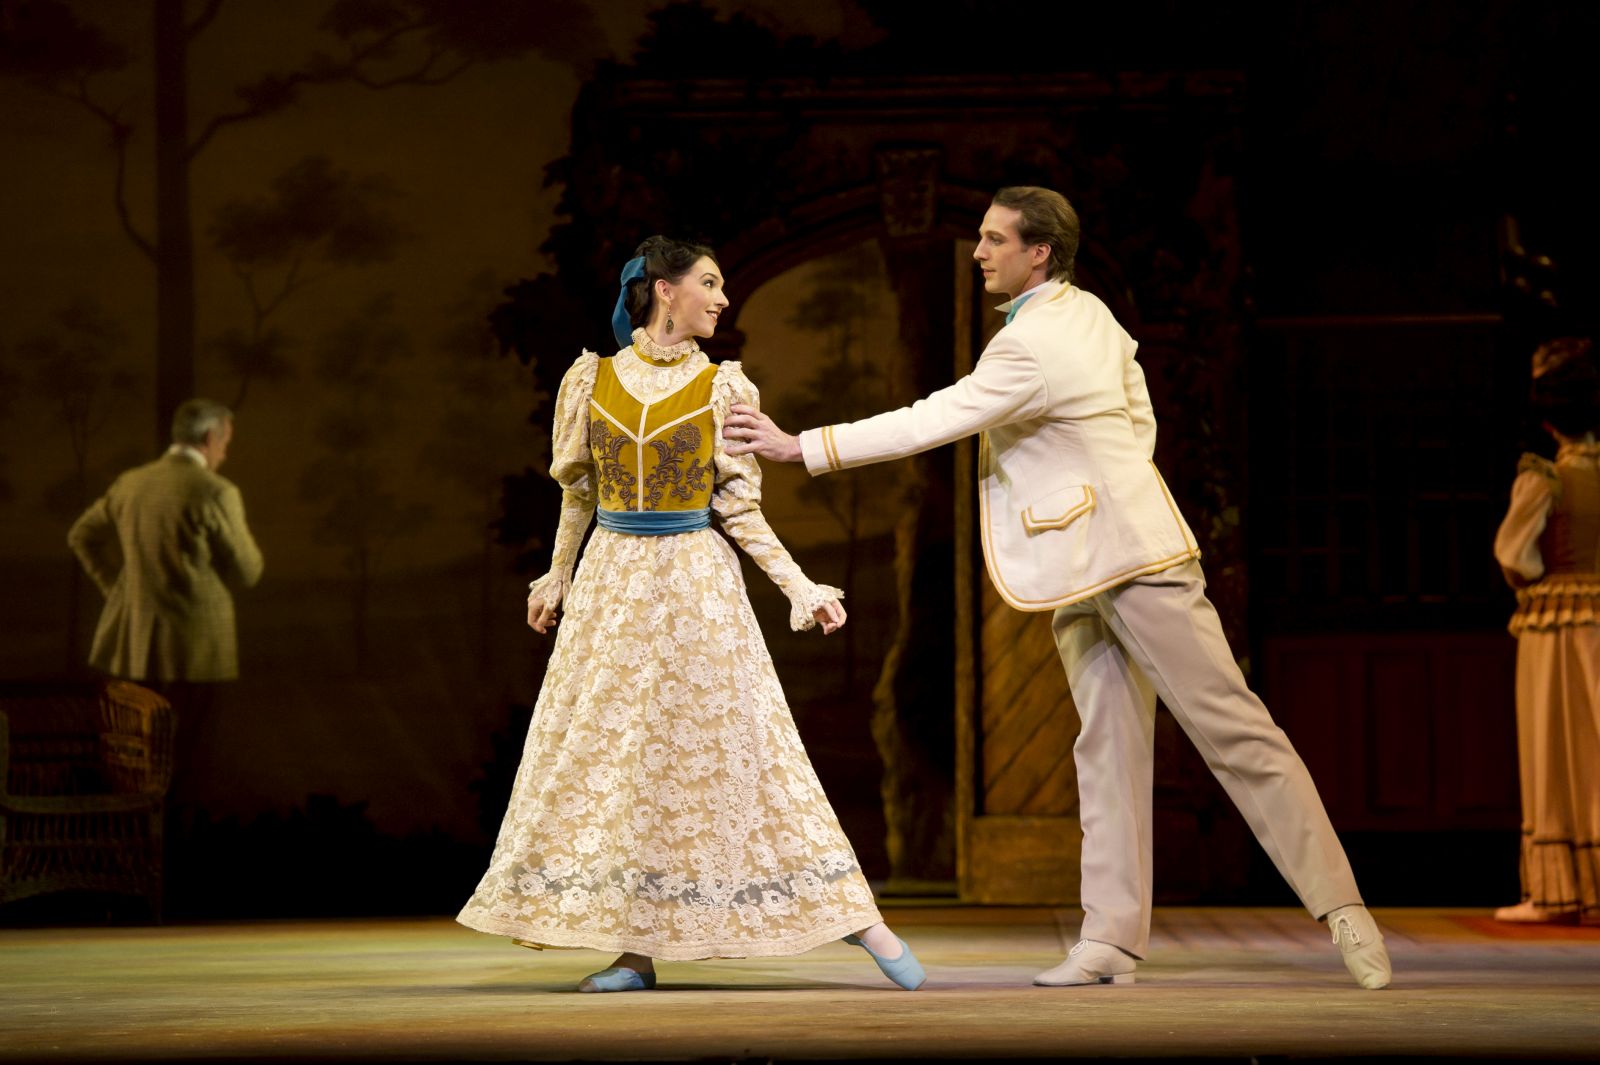 Lara Turk and Nehemiah Kish as Isabel Fitton and Richard P. Arnold  in The Royal Ballet production of Enigma Variations-Credit: Bill Cooper / Royal Opera House / ArenaPAL